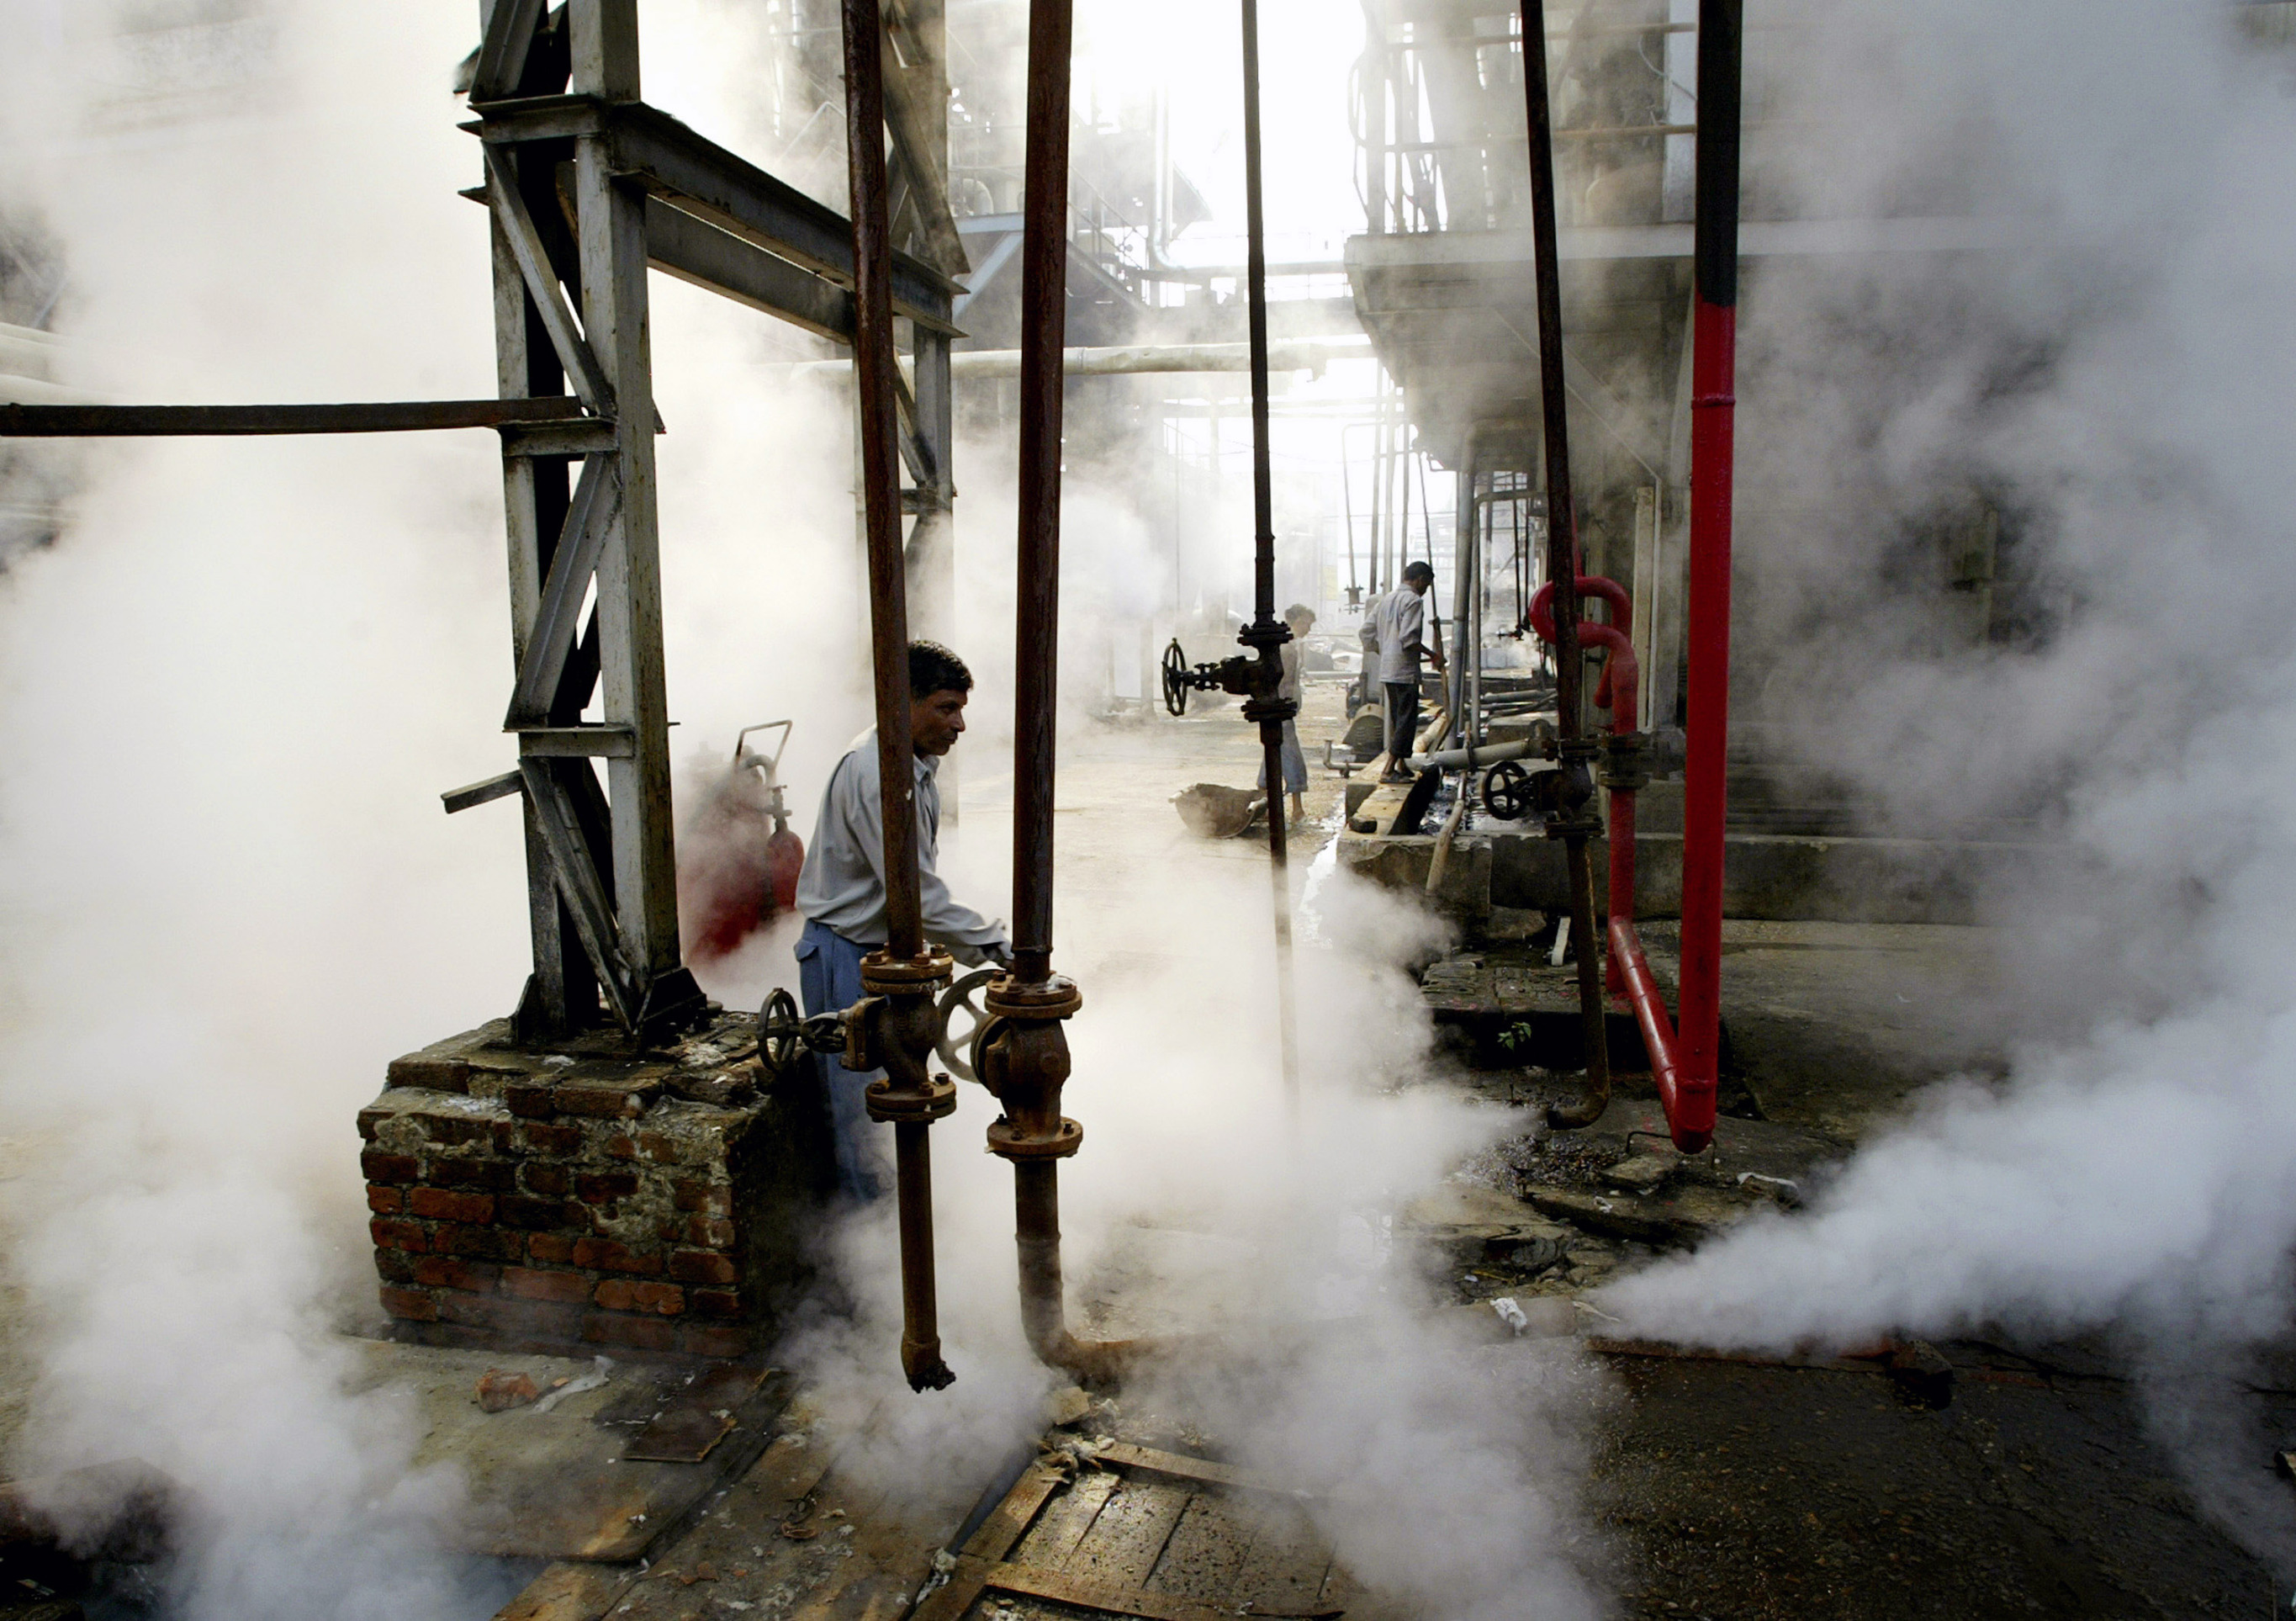 A worker operates a valve to release steam at a distillery in India.